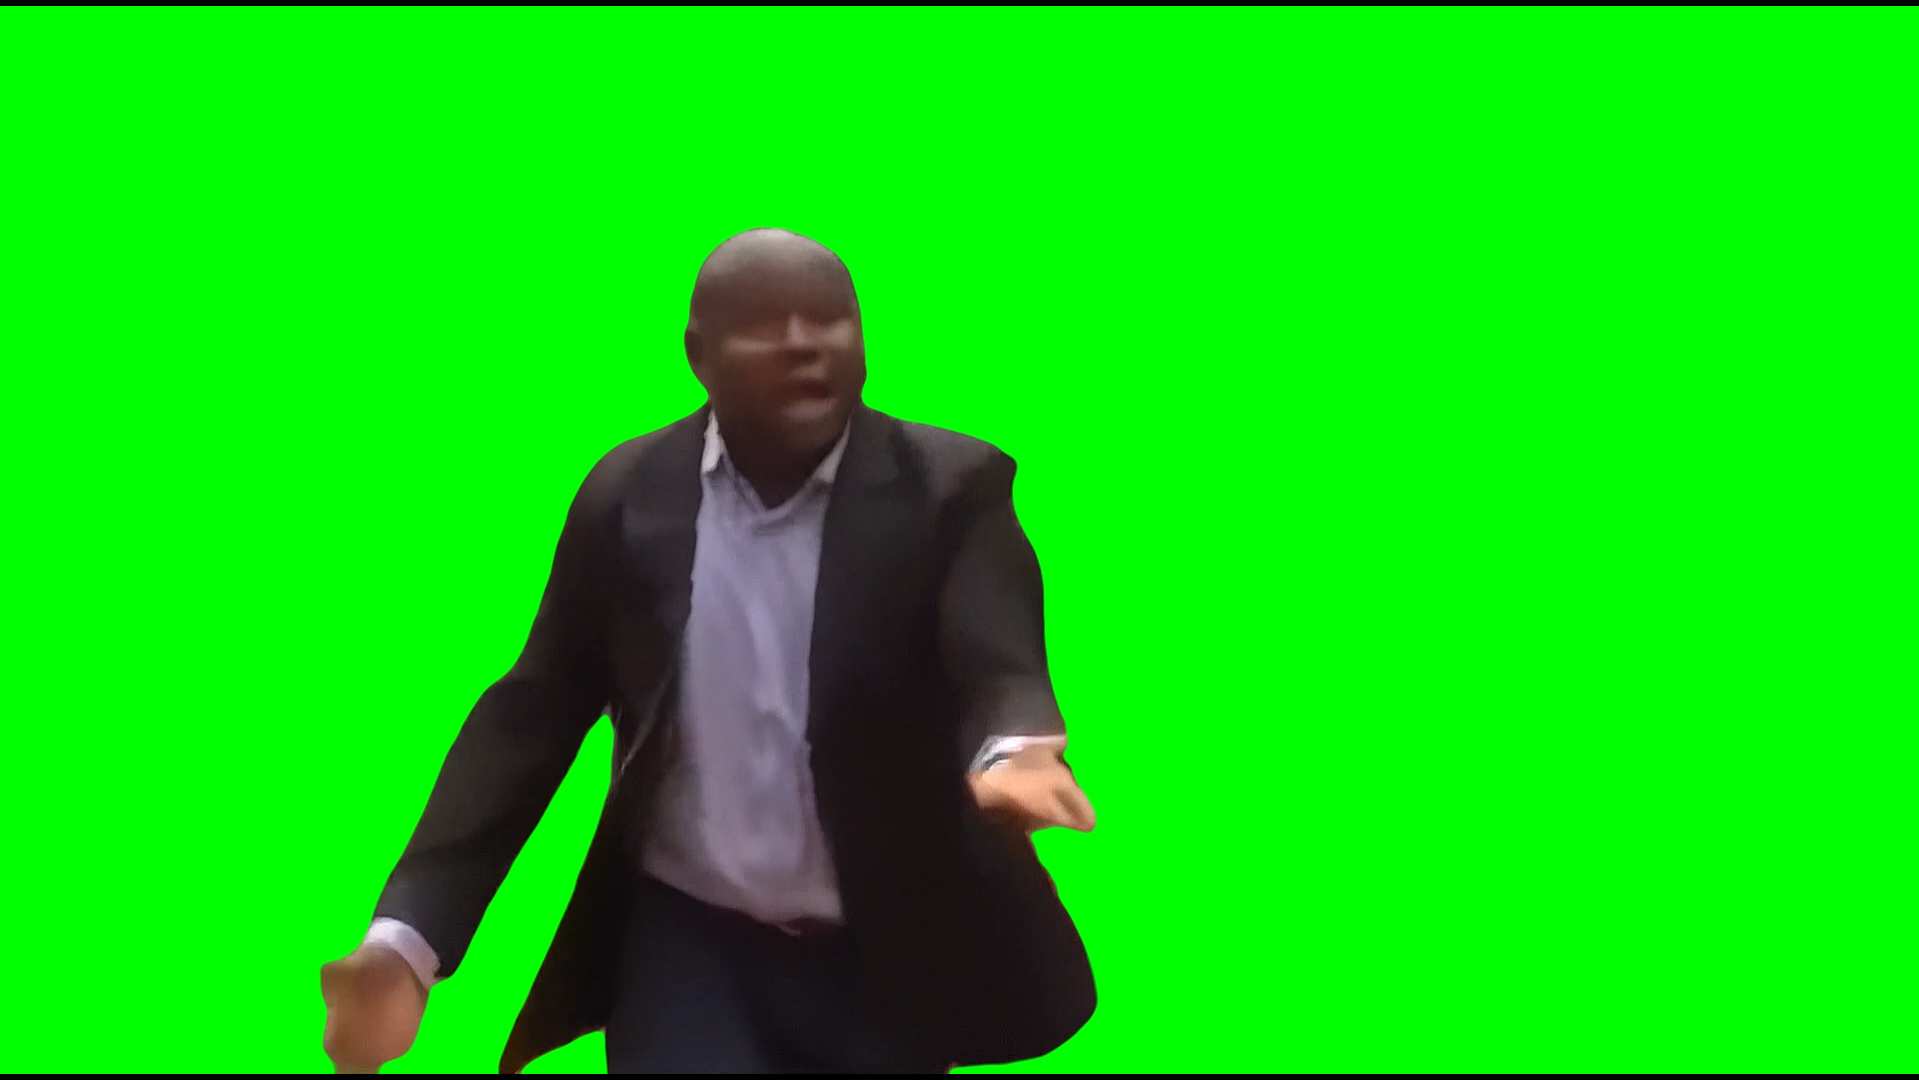 WHY ARE YOU RUNNING!? meme (Green Screen)